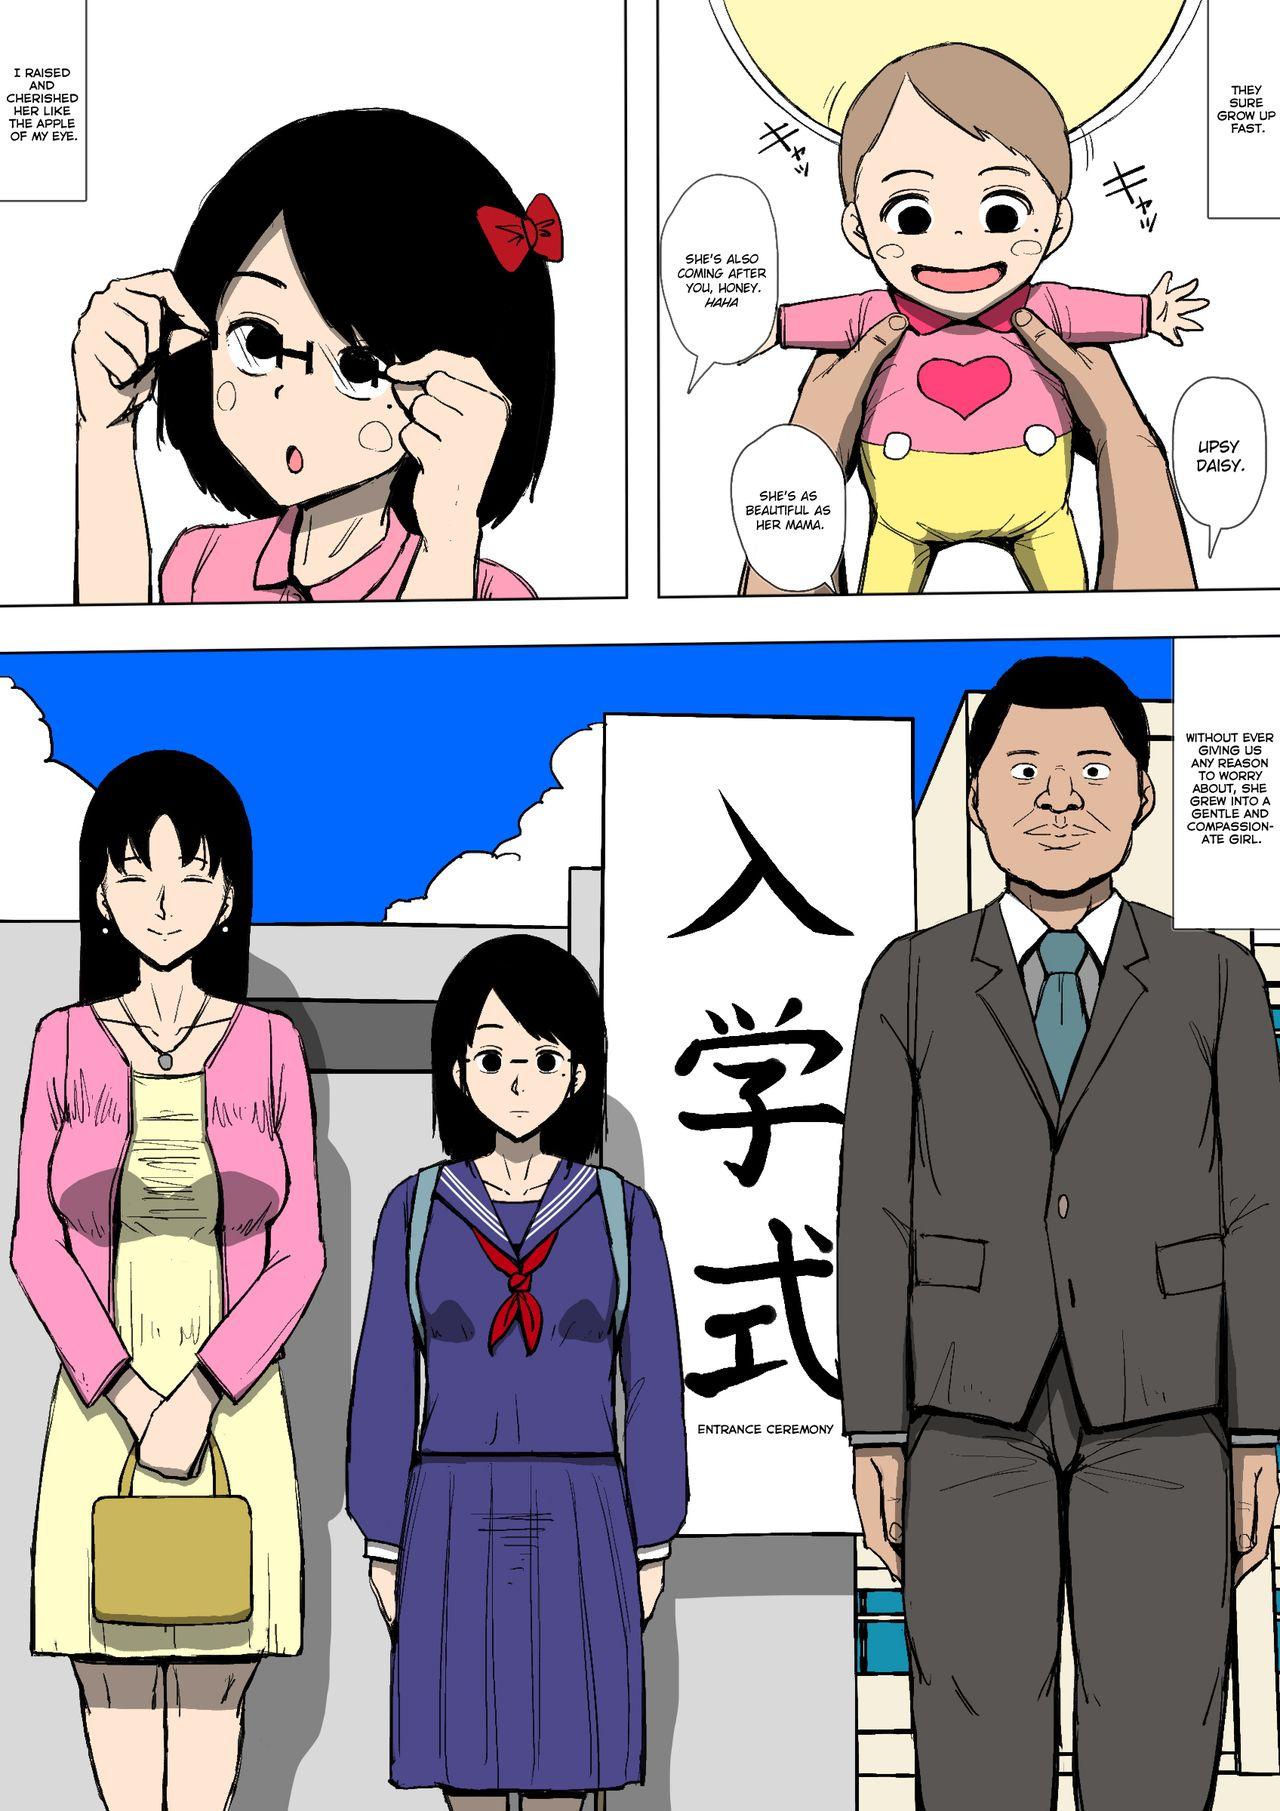 Musume ga Furyou ni Otosareteita | My Daughter was Corrupted by a Delinquent 2